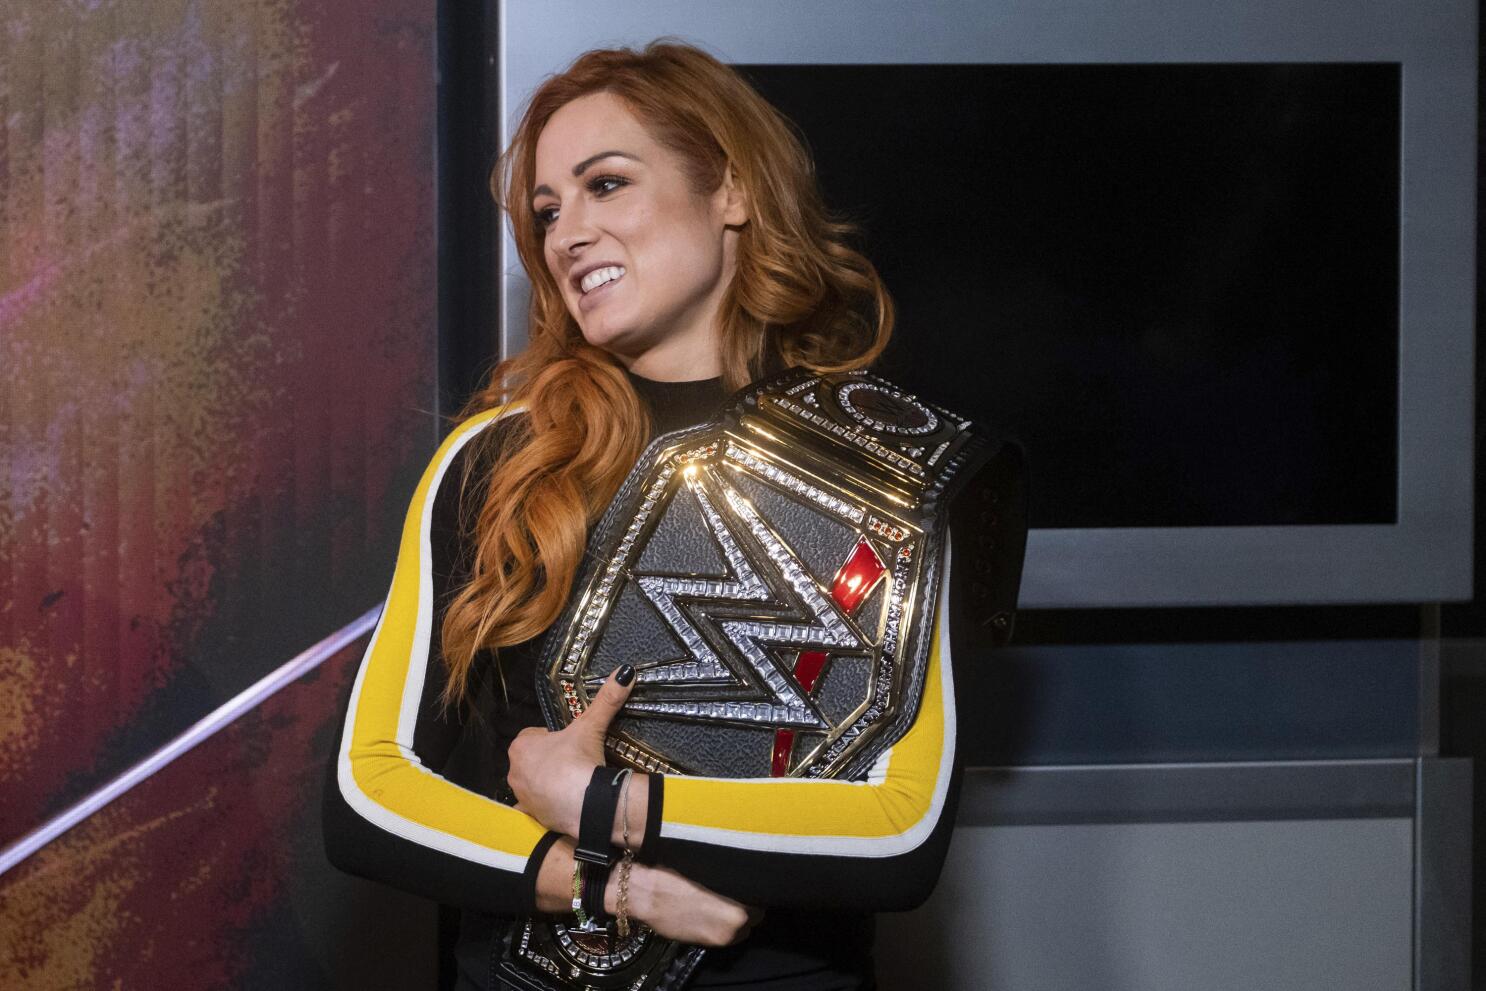 Becky Lynch back atop the SmackDown women's division as champion